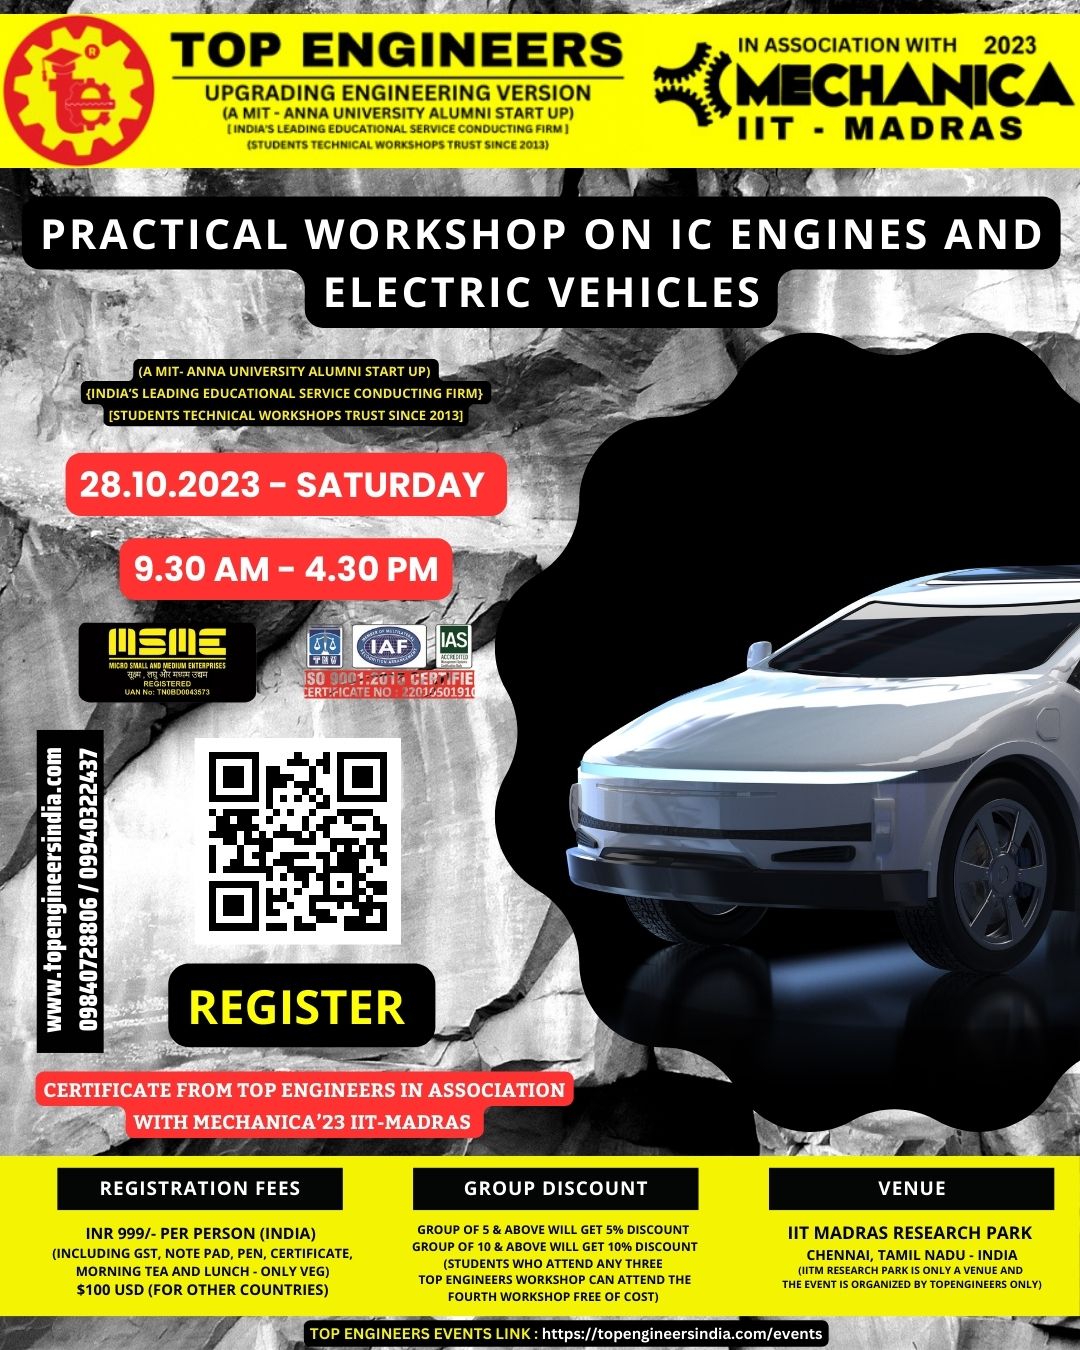 Practical Workshop on IC Engines and Electric Vehicles 2023